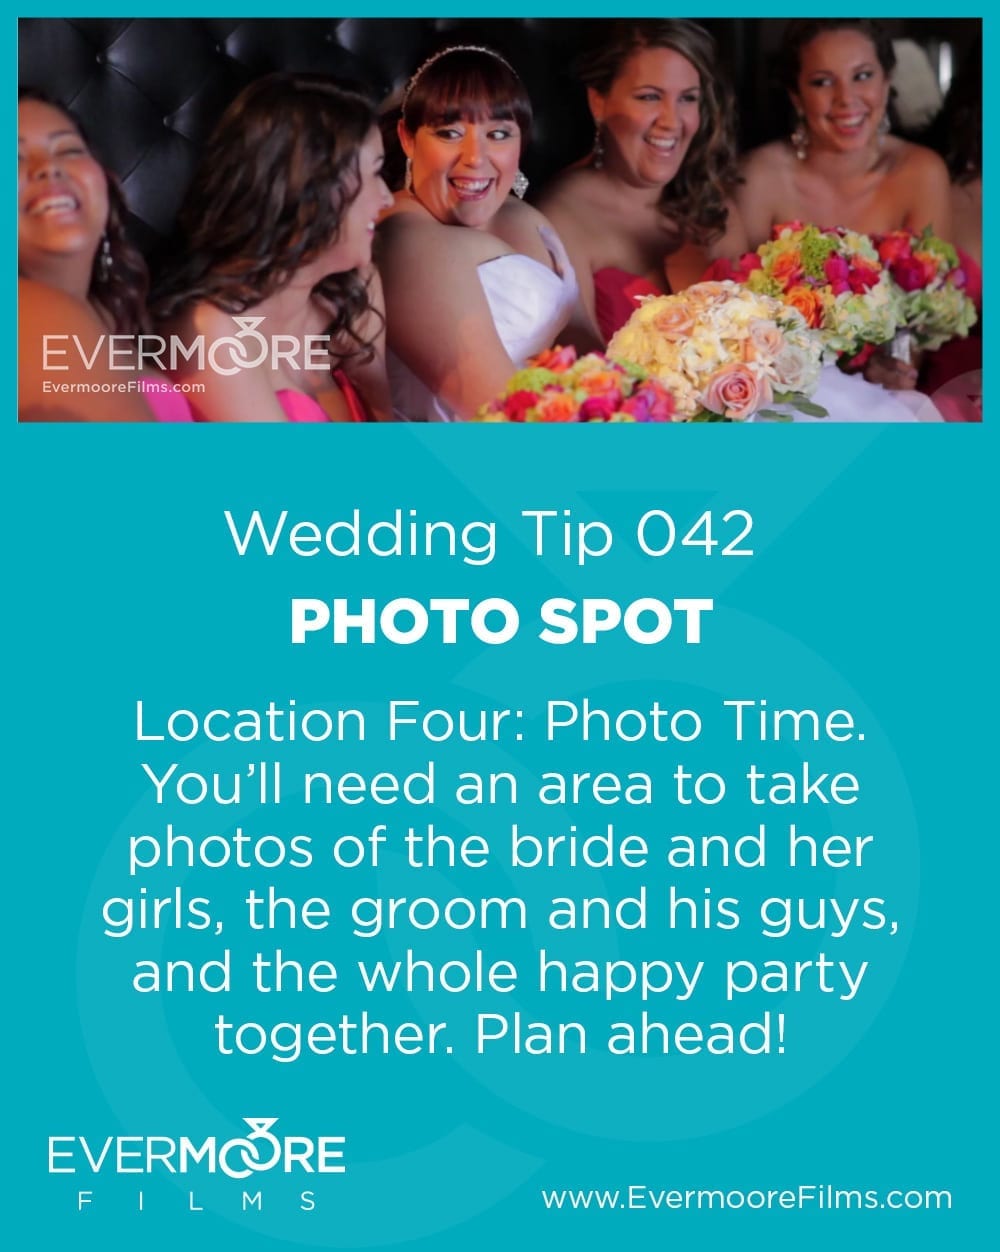 Photo Spot | Wedding Tip 042 | Evermoore Films | Location Four: Photo Time. You'll need an area to take photos of the bride and her girls, the groom and his guys, and the whole happy party together. Plan ahead!